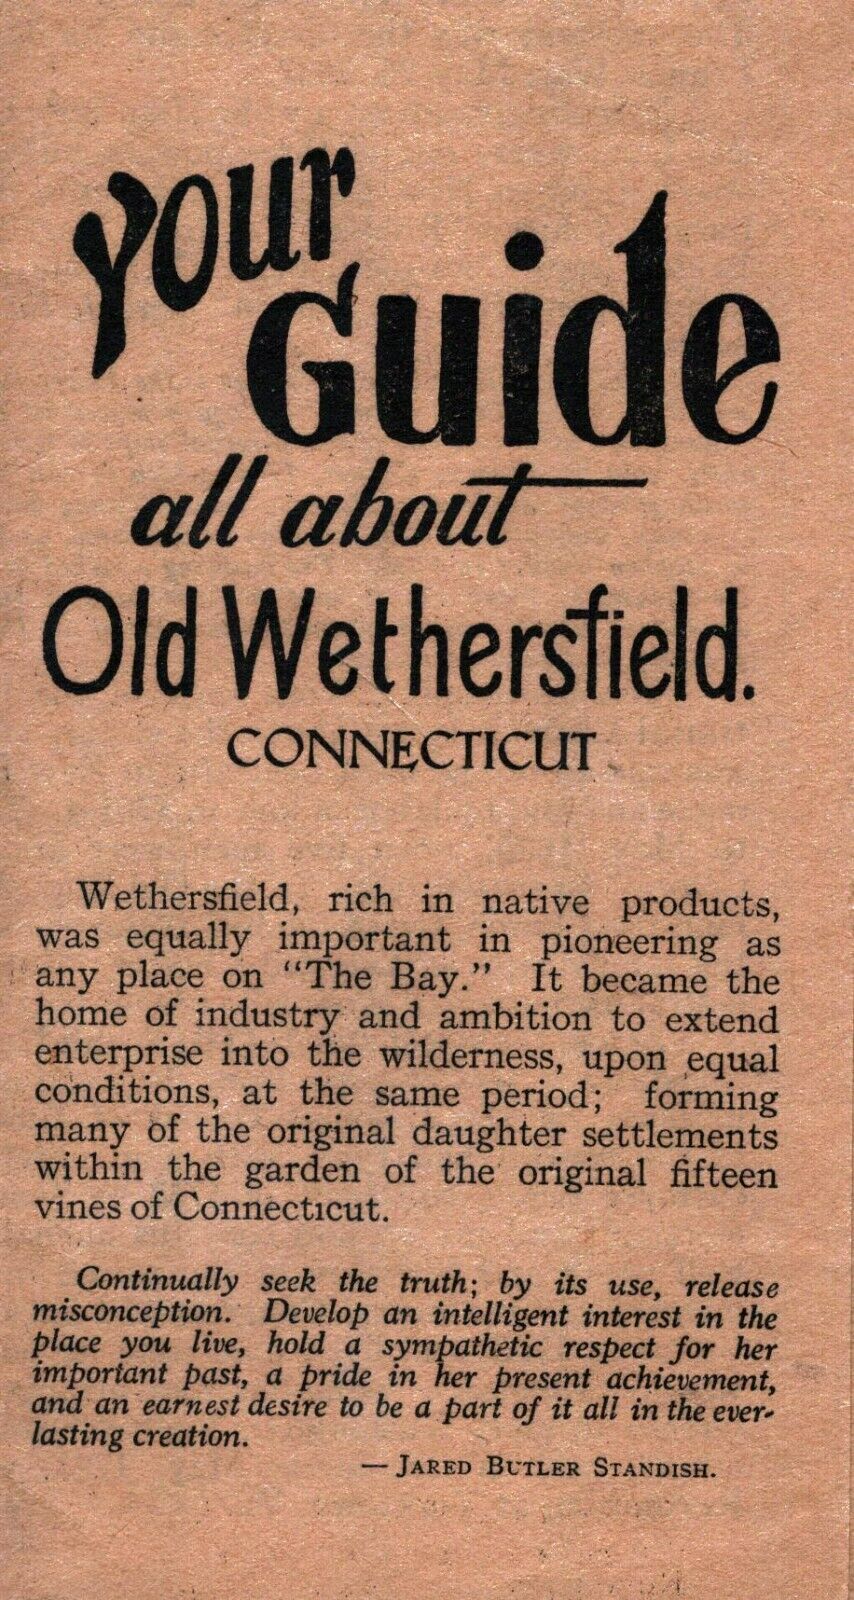 1934  Old Weathersfield  Connecticut  Guide  & Map  11